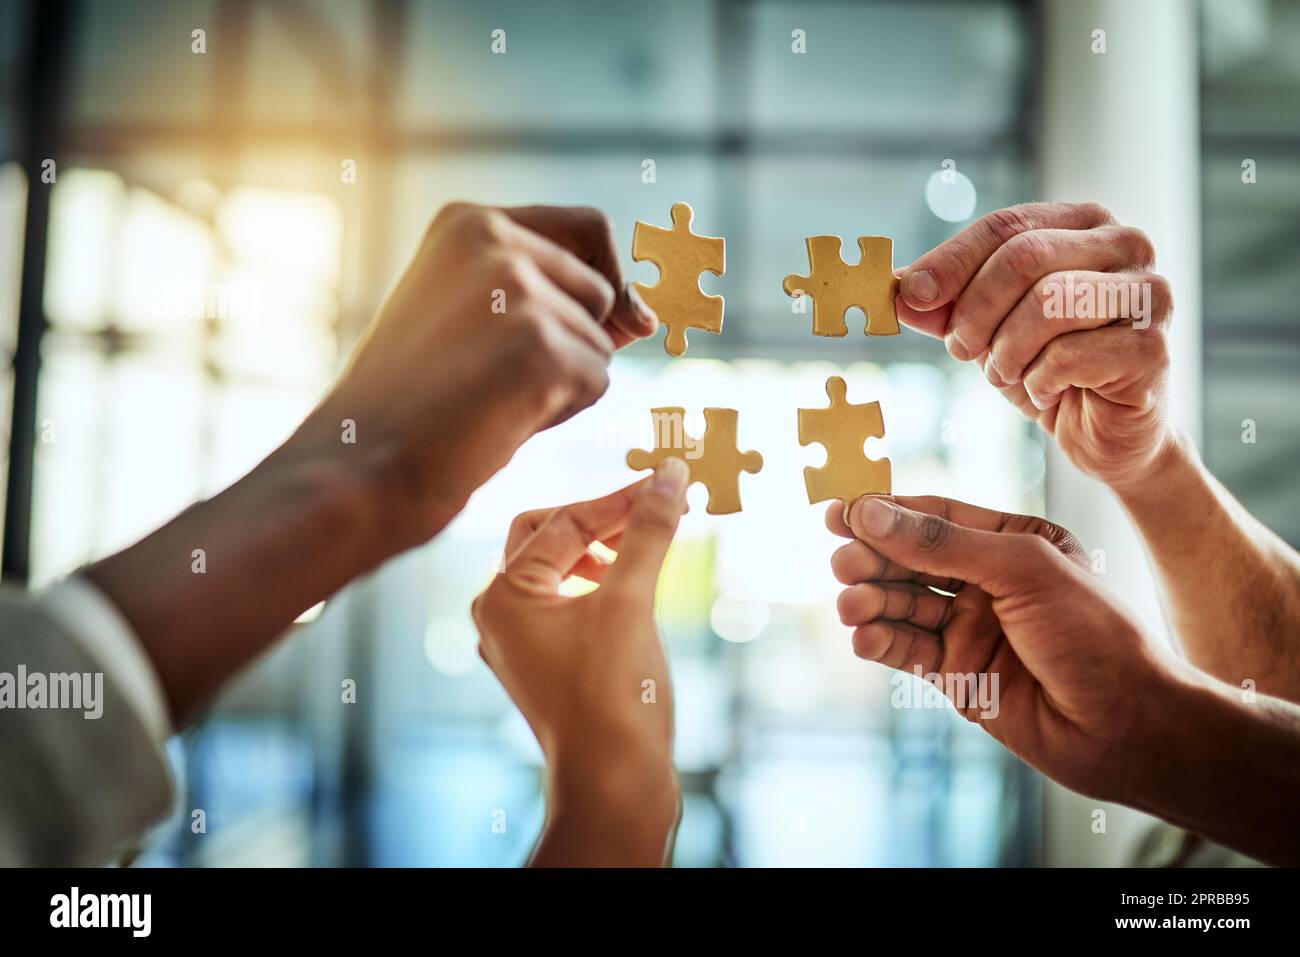 Group of business people holding puzzle pieces. Professionals connect and collaborate together inside office building. Closeup of hands, and team working together on a new strategy for success. Stock Photo